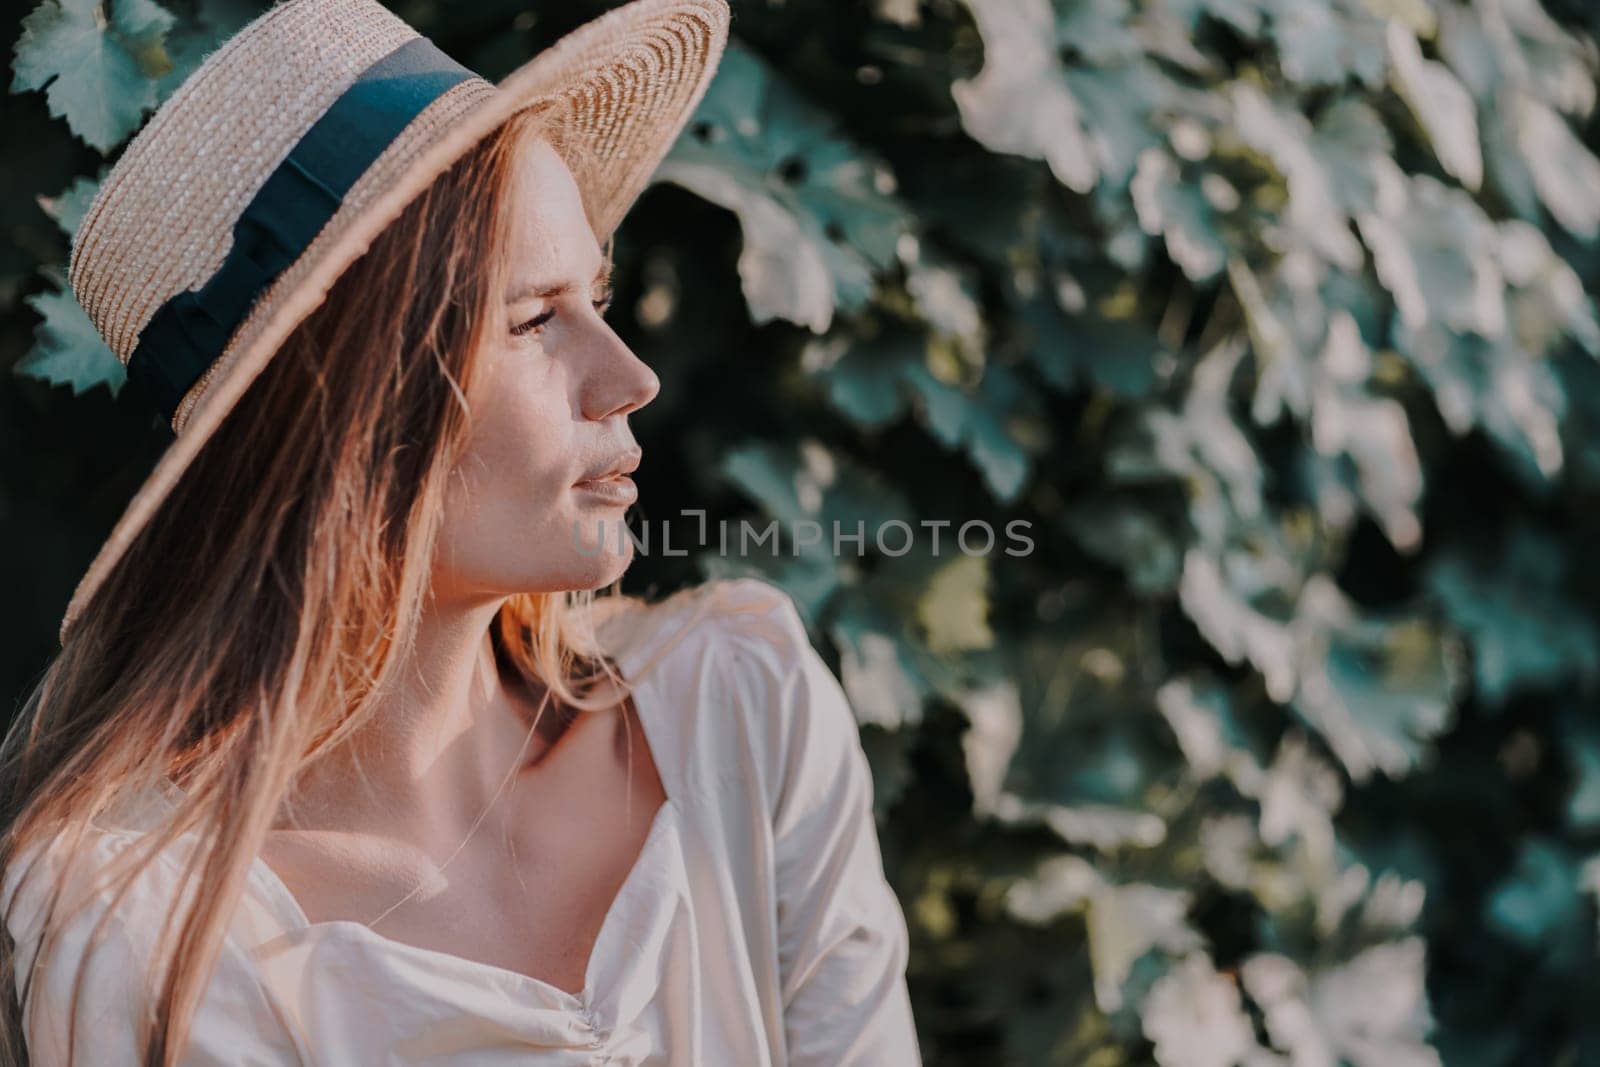 Woman with straw hat stands in front of vineyard. She is wearing a light dress and posing for a photo. Travel concept to different countries.